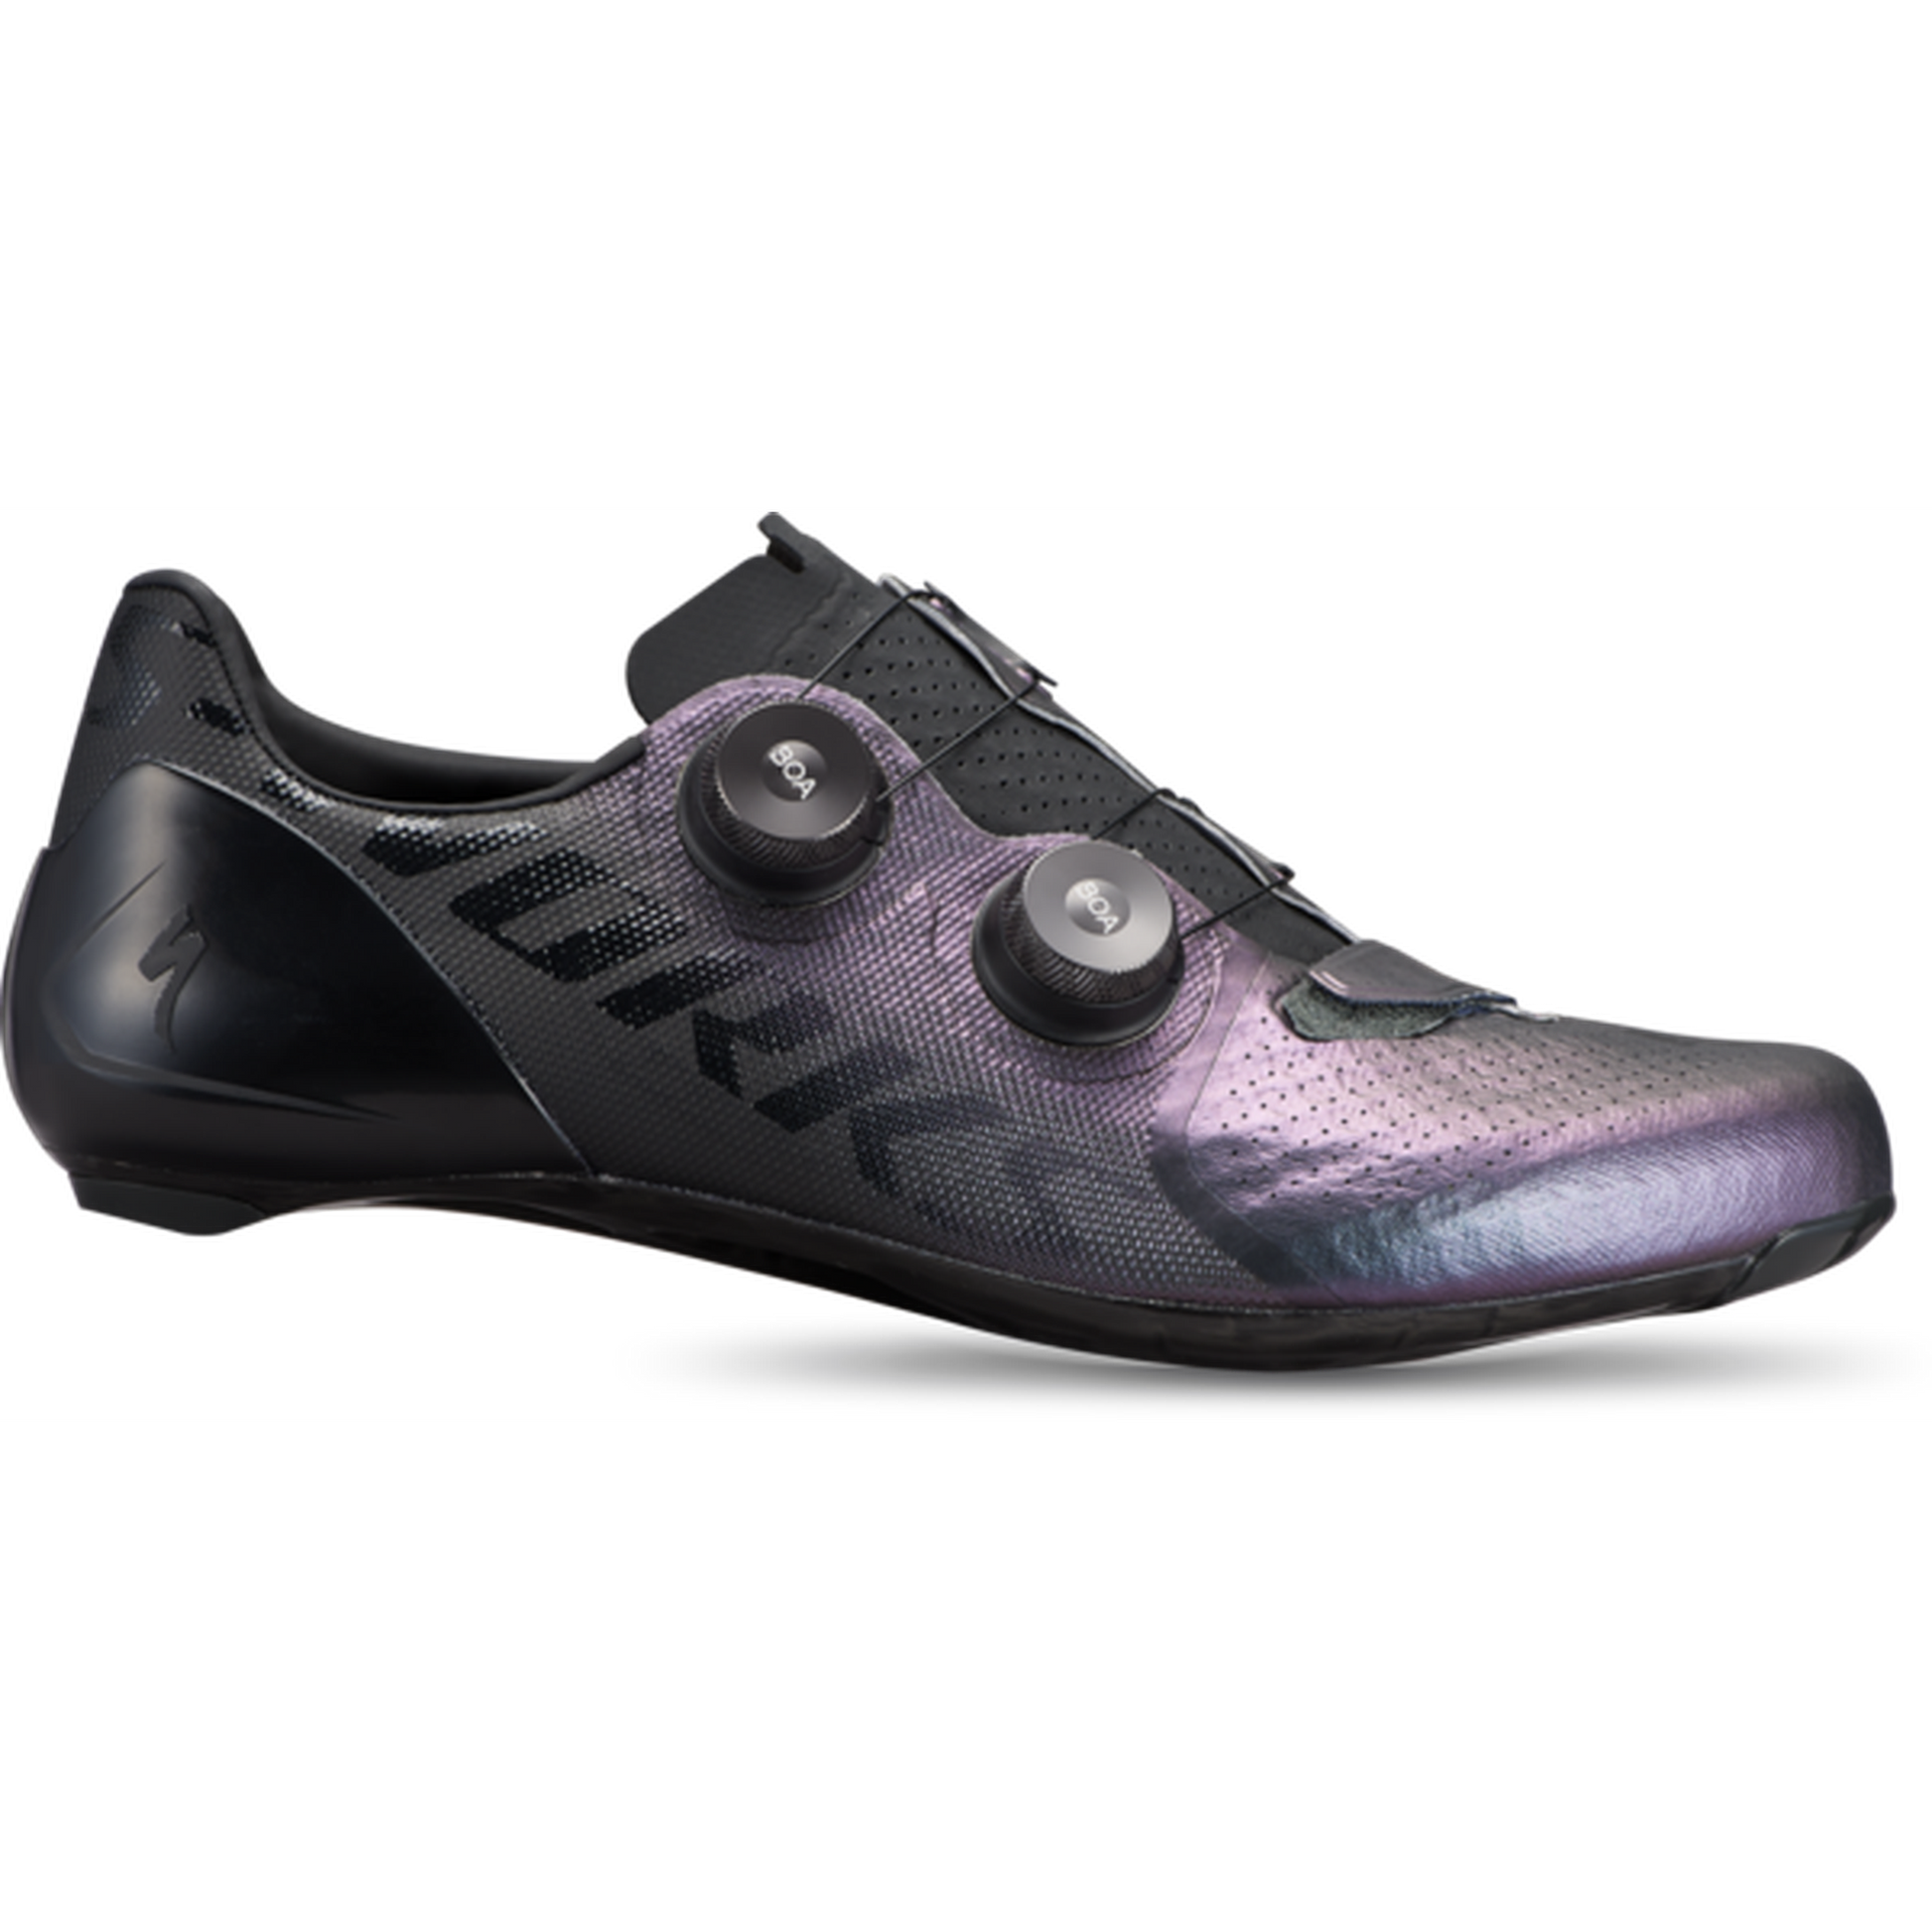 S-Works 7 Road Shoes-Cycles Direct Specialized